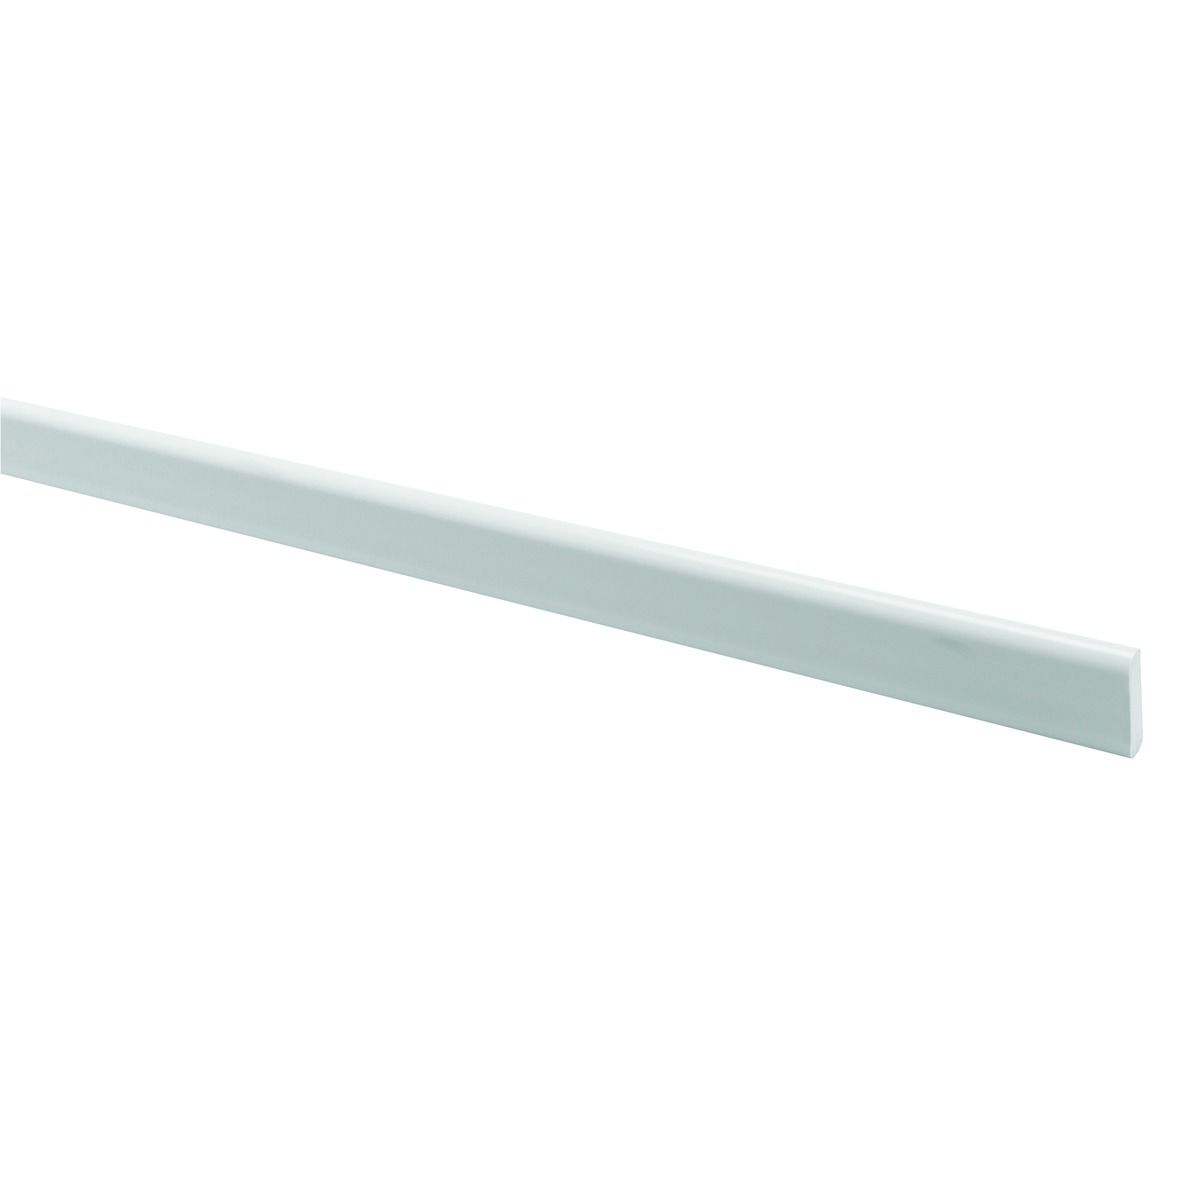 Image of Wickes PVCu White Window Cloaking Trim - 65 x 2500mm - Pack of 5